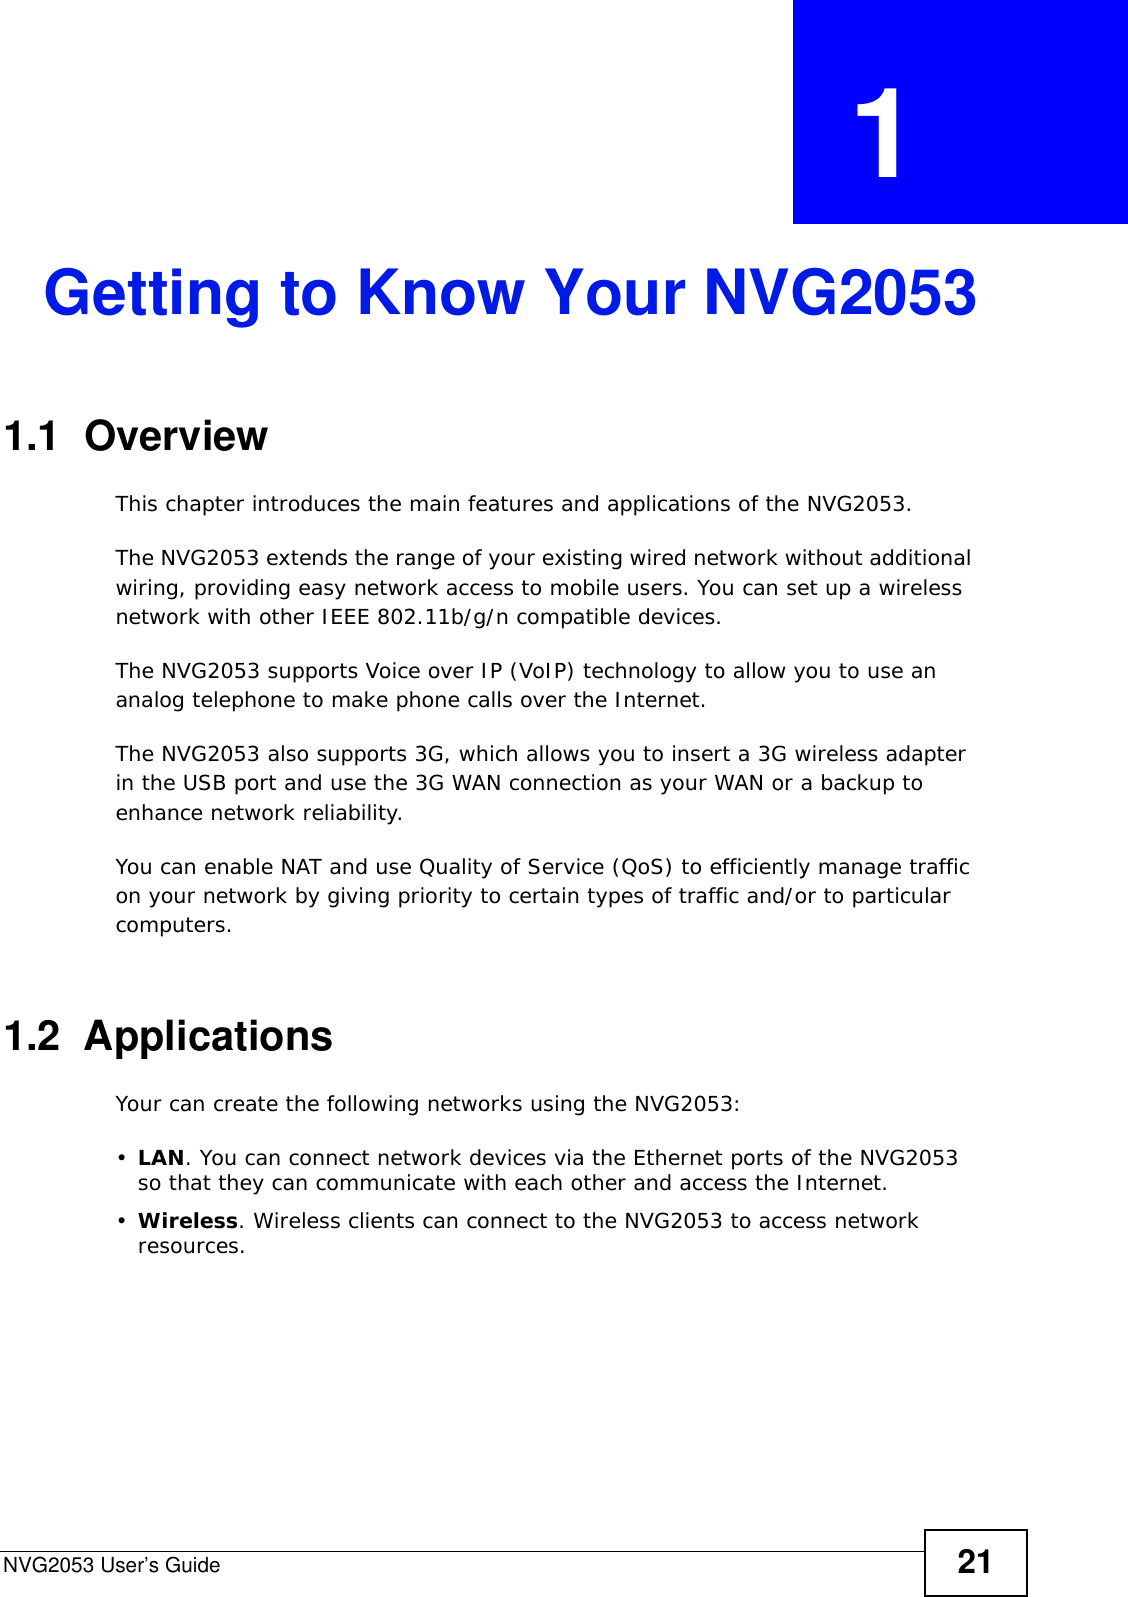 NVG2053 User’s Guide 21CHAPTER  1 Getting to Know Your NVG20531.1  OverviewThis chapter introduces the main features and applications of the NVG2053.The NVG2053 extends the range of your existing wired network without additional wiring, providing easy network access to mobile users. You can set up a wireless network with other IEEE 802.11b/g/n compatible devices.The NVG2053 supports Voice over IP (VoIP) technology to allow you to use an analog telephone to make phone calls over the Internet.The NVG2053 also supports 3G, which allows you to insert a 3G wireless adapter in the USB port and use the 3G WAN connection as your WAN or a backup to enhance network reliability.You can enable NAT and use Quality of Service (QoS) to efficiently manage traffic on your network by giving priority to certain types of traffic and/or to particular computers. 1.2  ApplicationsYour can create the following networks using the NVG2053:•LAN. You can connect network devices via the Ethernet ports of the NVG2053 so that they can communicate with each other and access the Internet.•Wireless. Wireless clients can connect to the NVG2053 to access network resources.